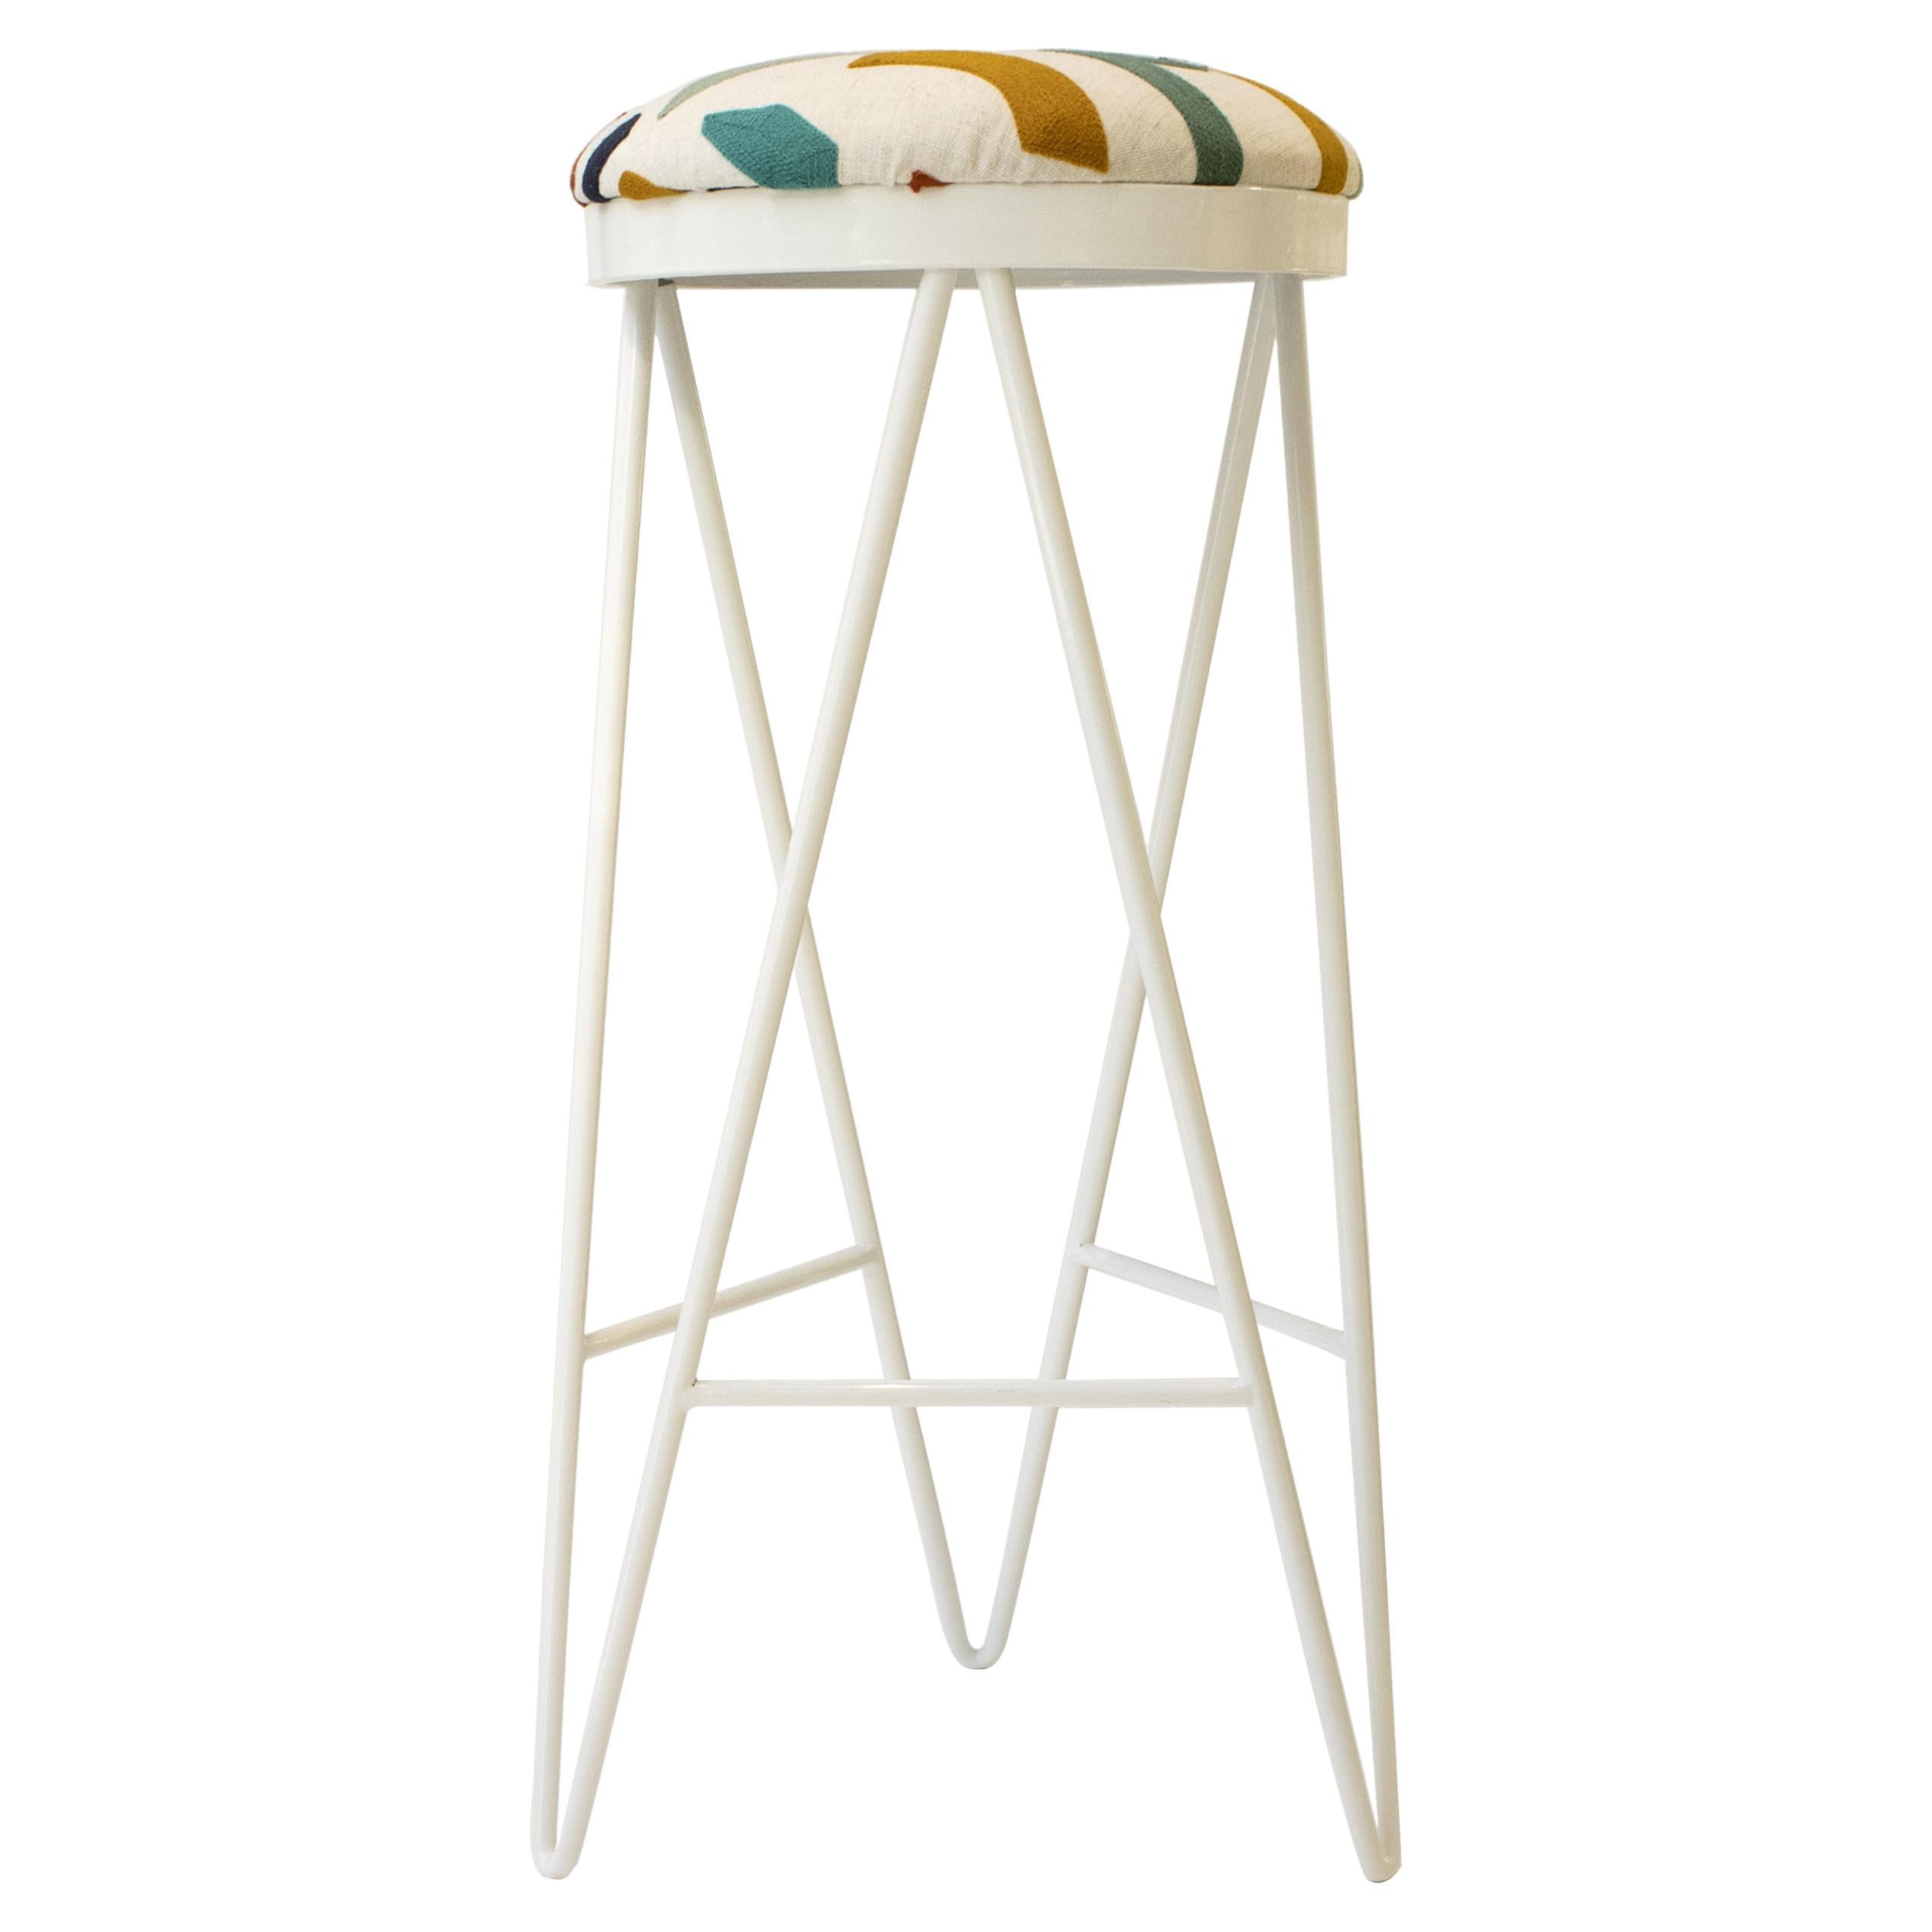 Contemporary stool designed by ikb191 studio. It consists of a Steel structure lacquered in white, and a foam seat, upholstered in beige cotton with a linen embroidered pattern. Manufacture in Spain 2022.

